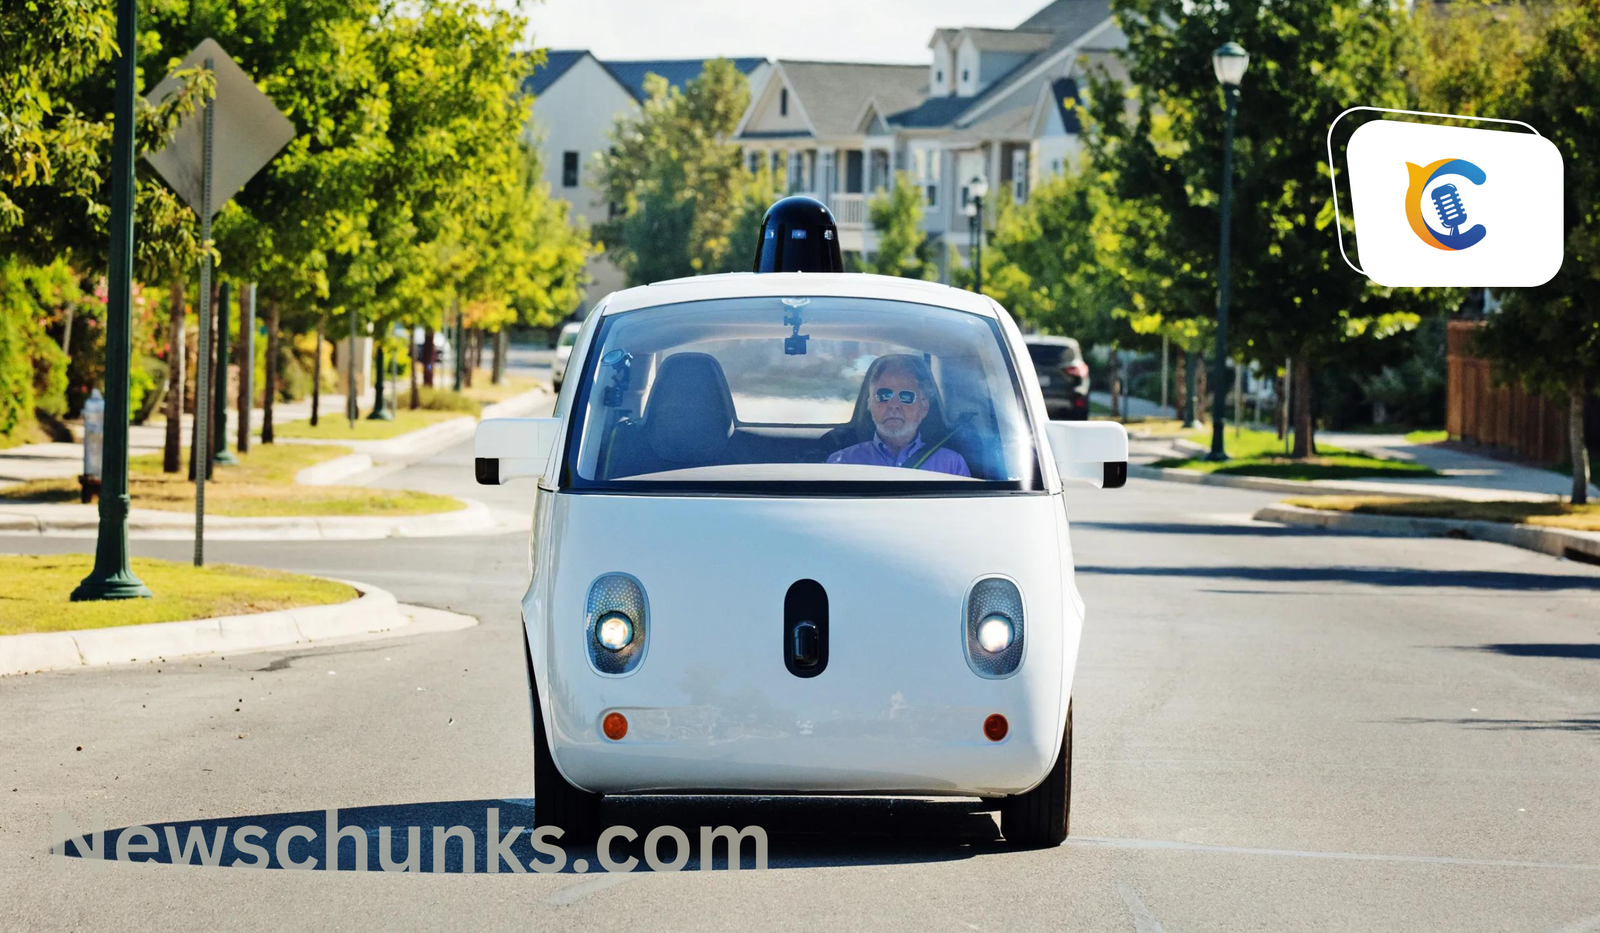 Google's Waymo driverless cars now coming to Chicago